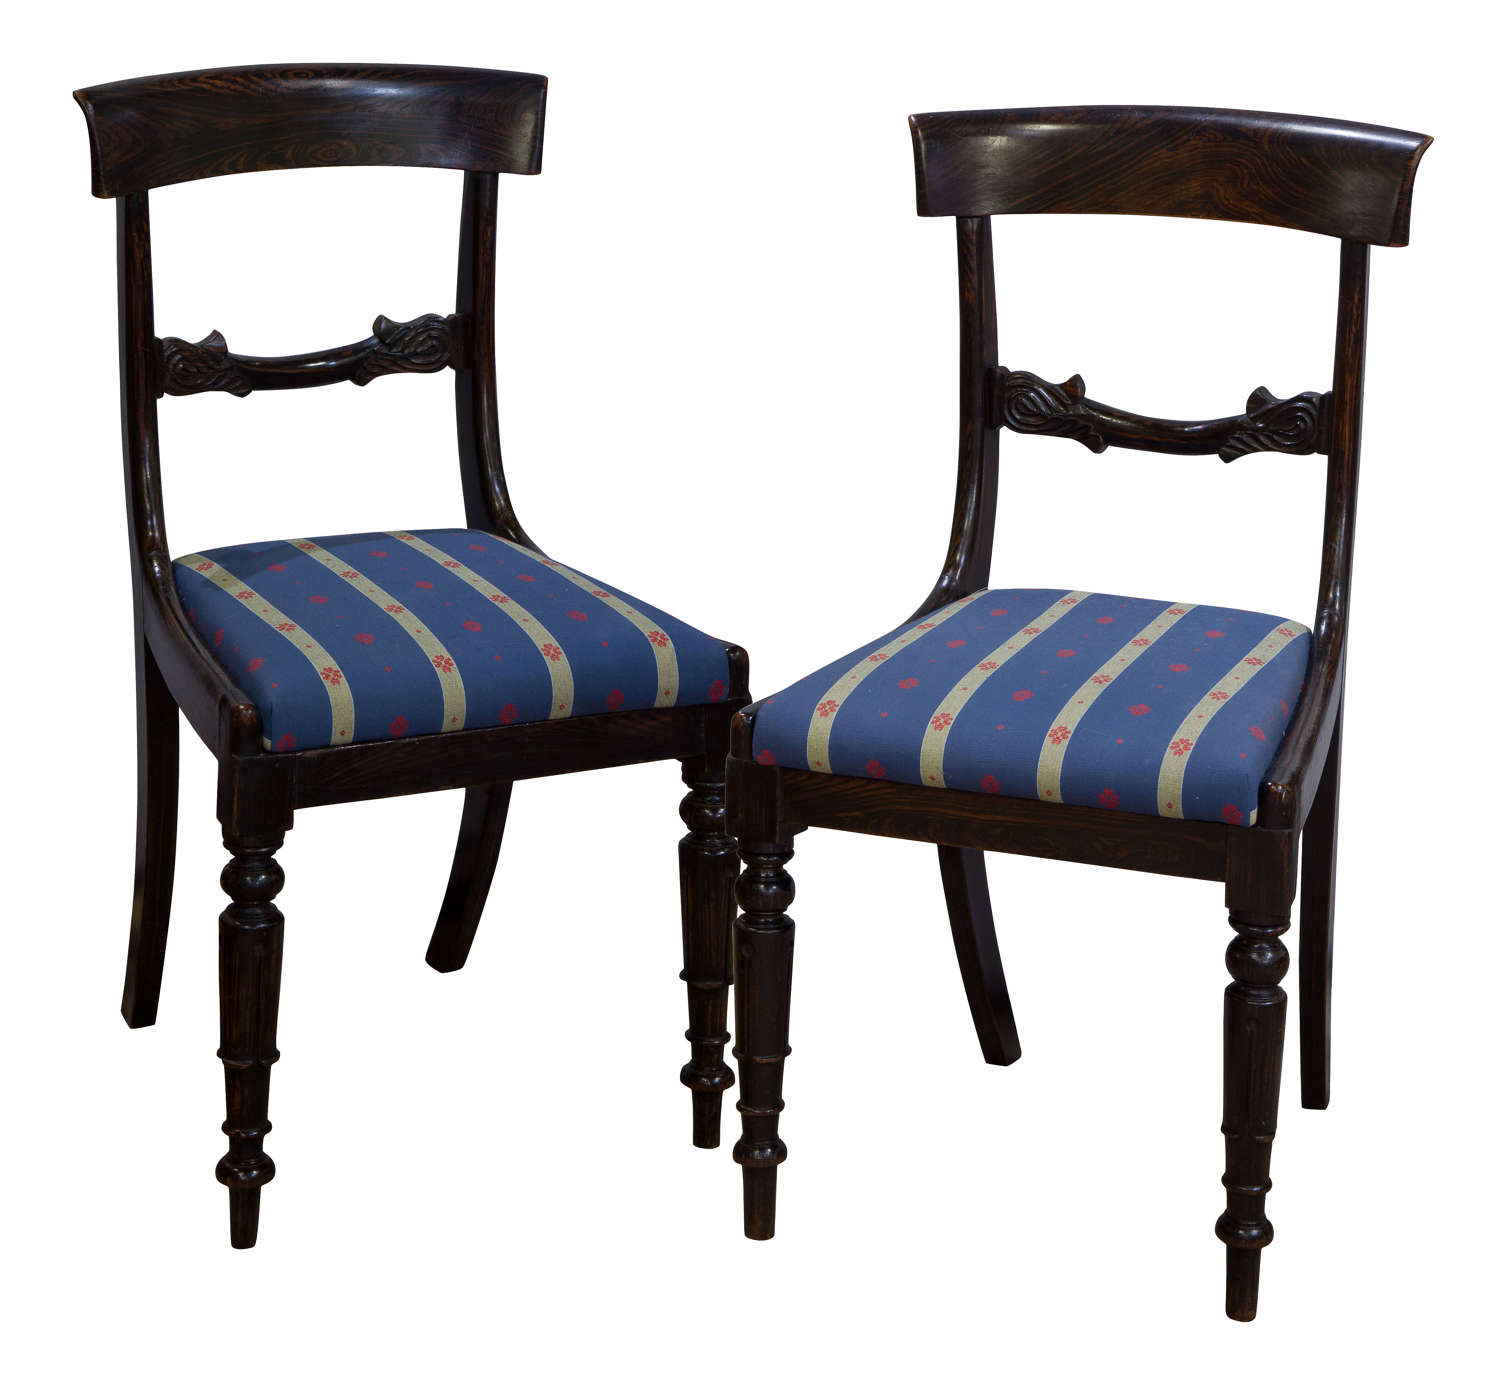 Pair of faux rosewood side chairs